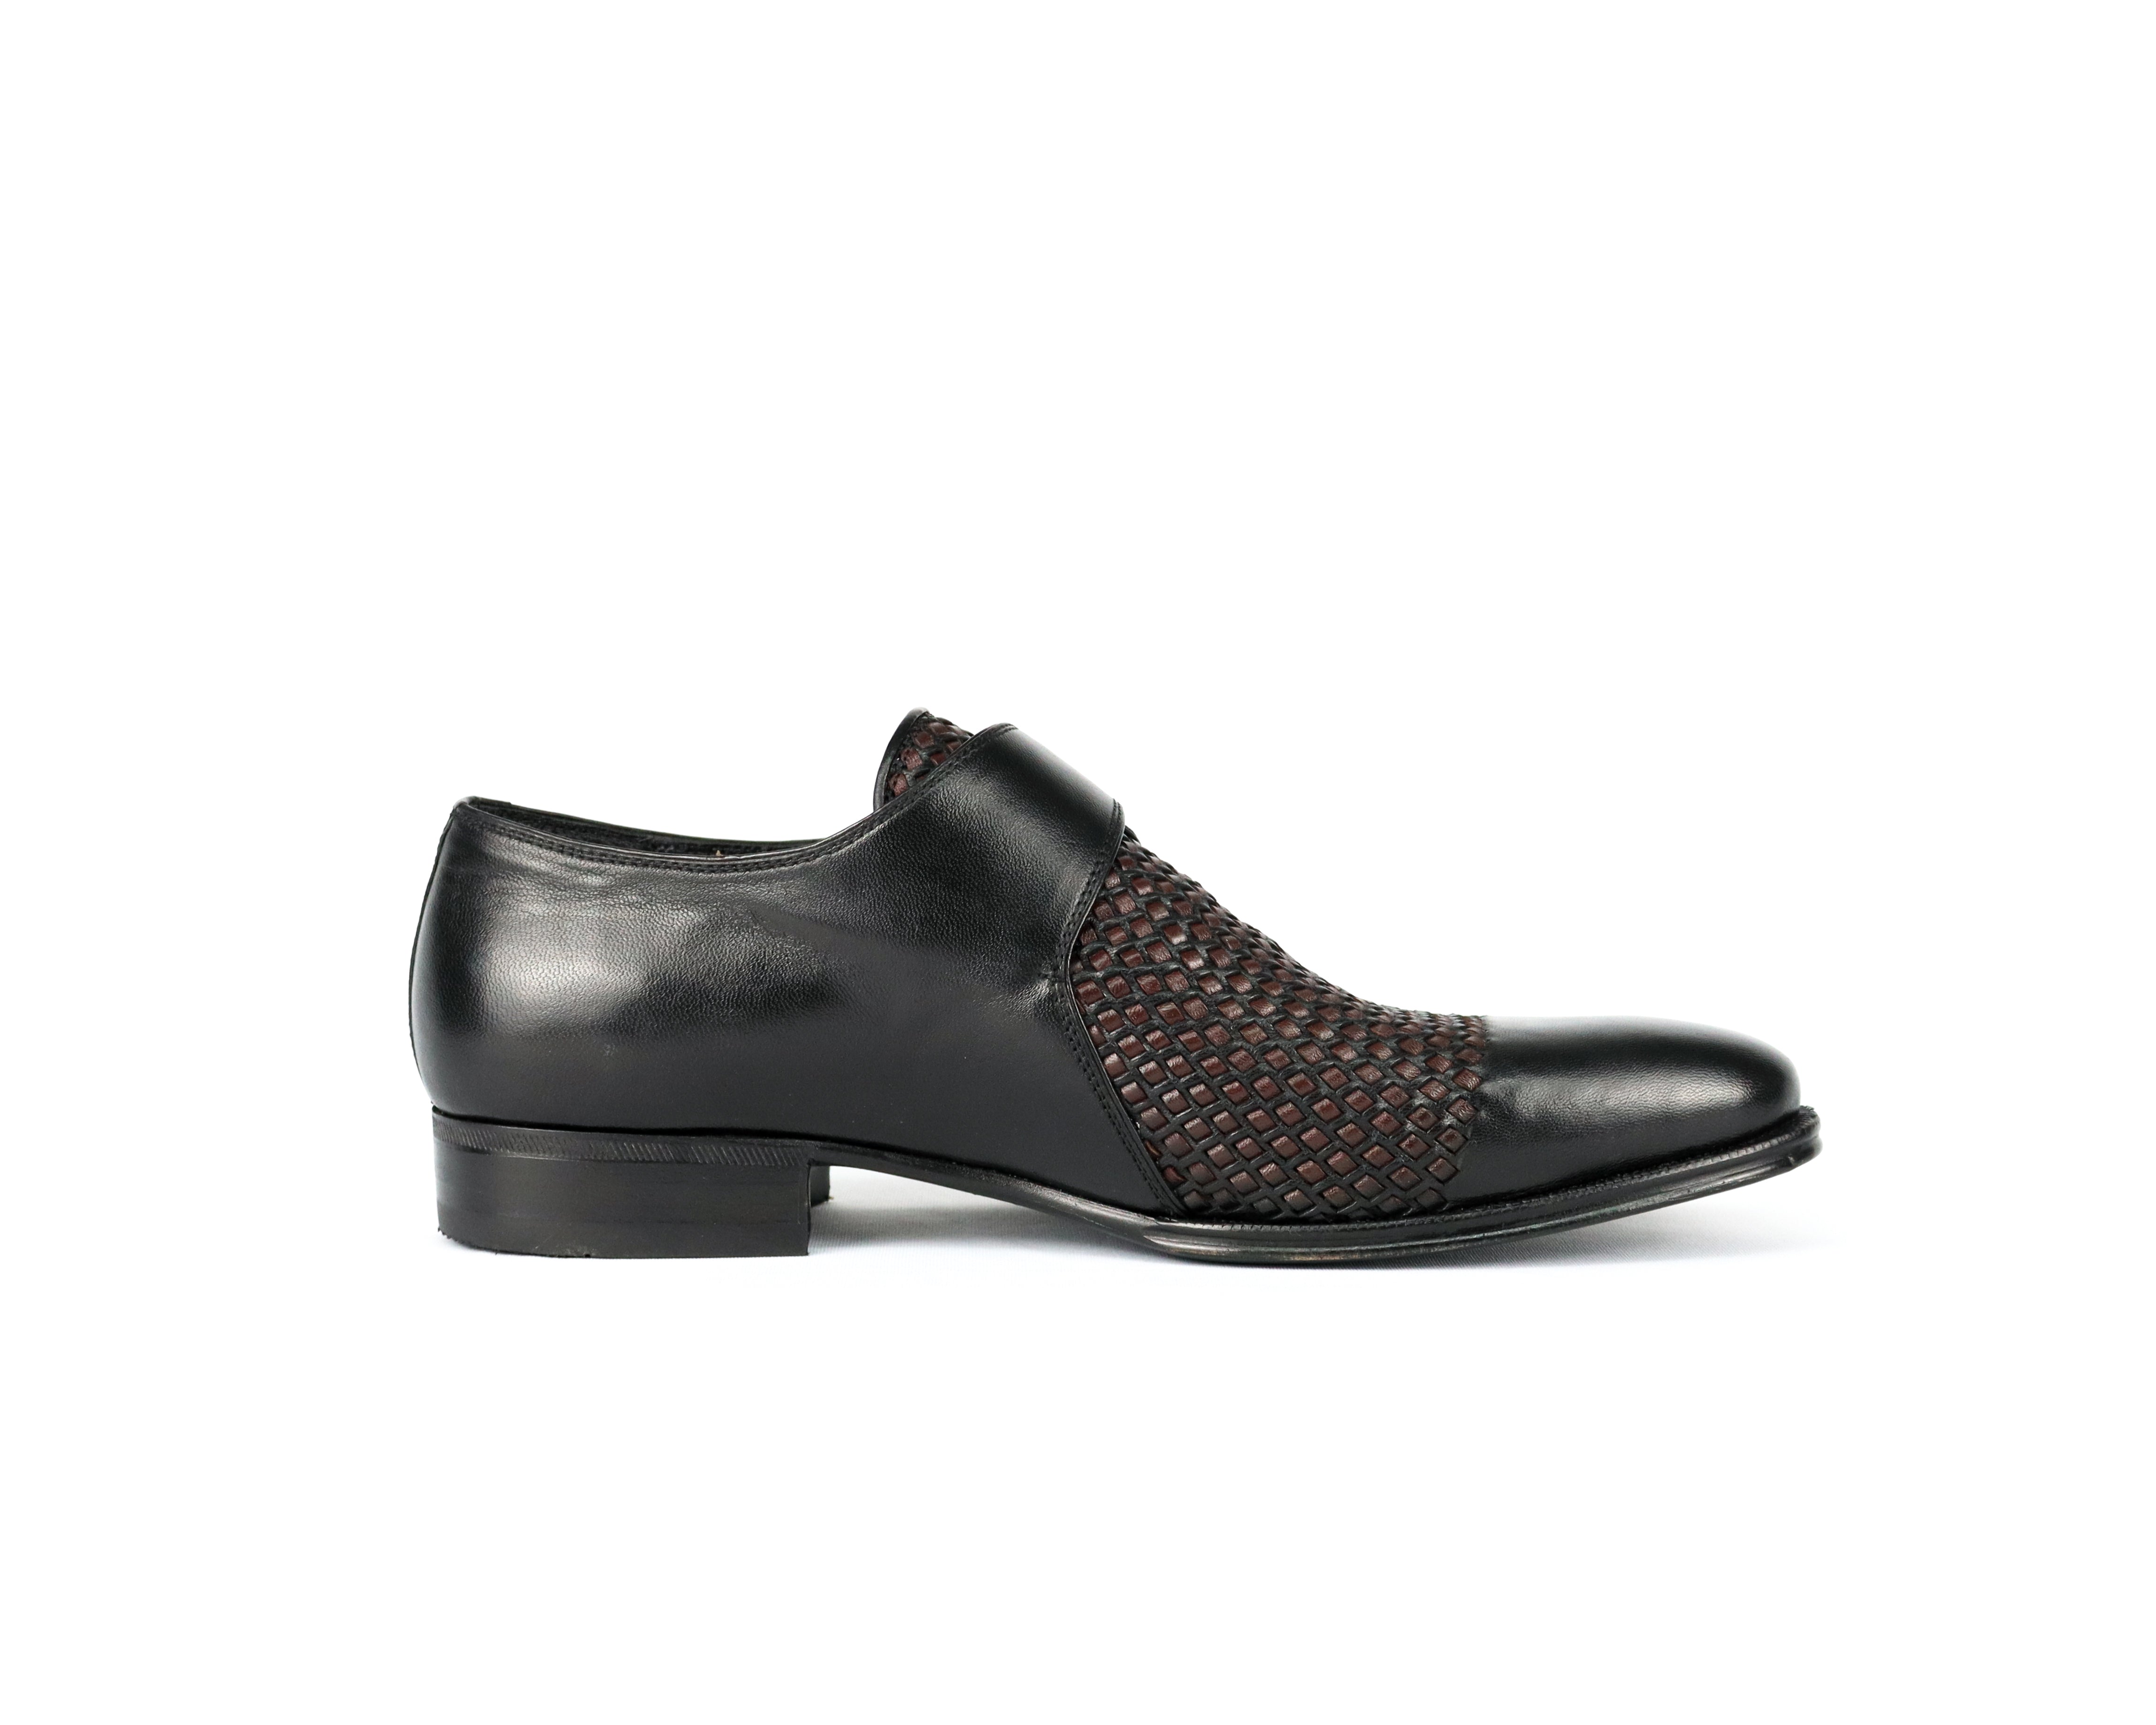 Monk Carlos Shoe - Smooth leather with Manual Tresse detail